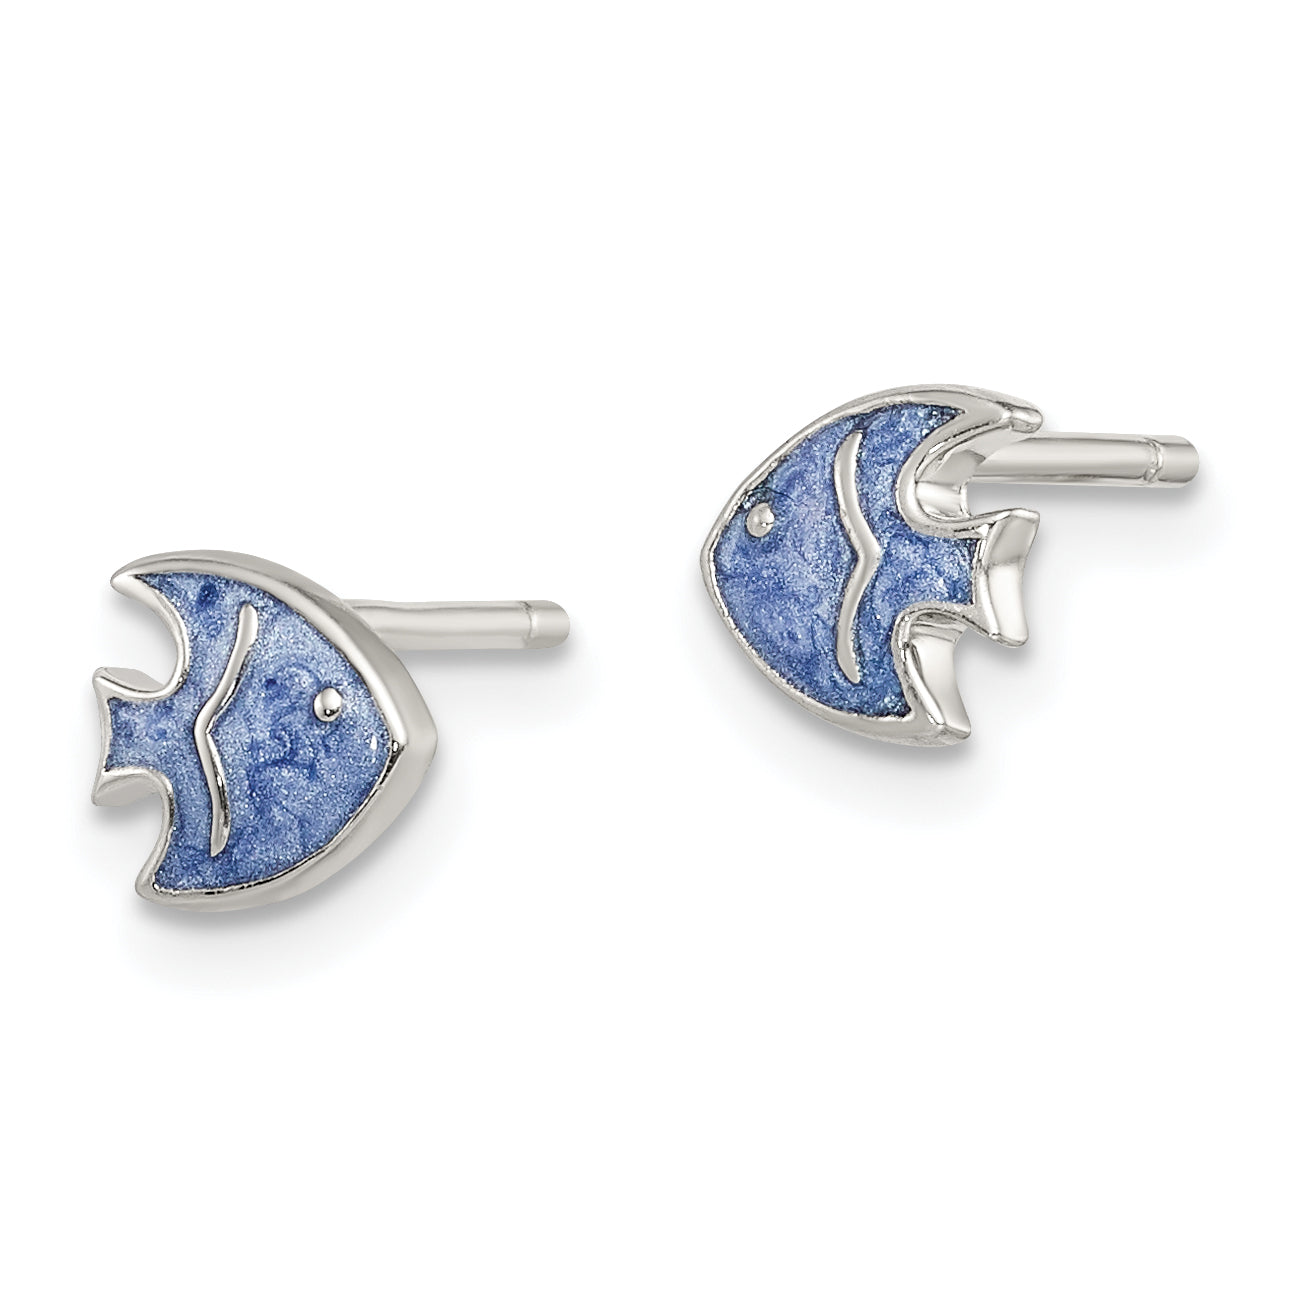 Sterling Silver Rhodium-plated Polished Blue Enameled Fish Childs Post Earrings